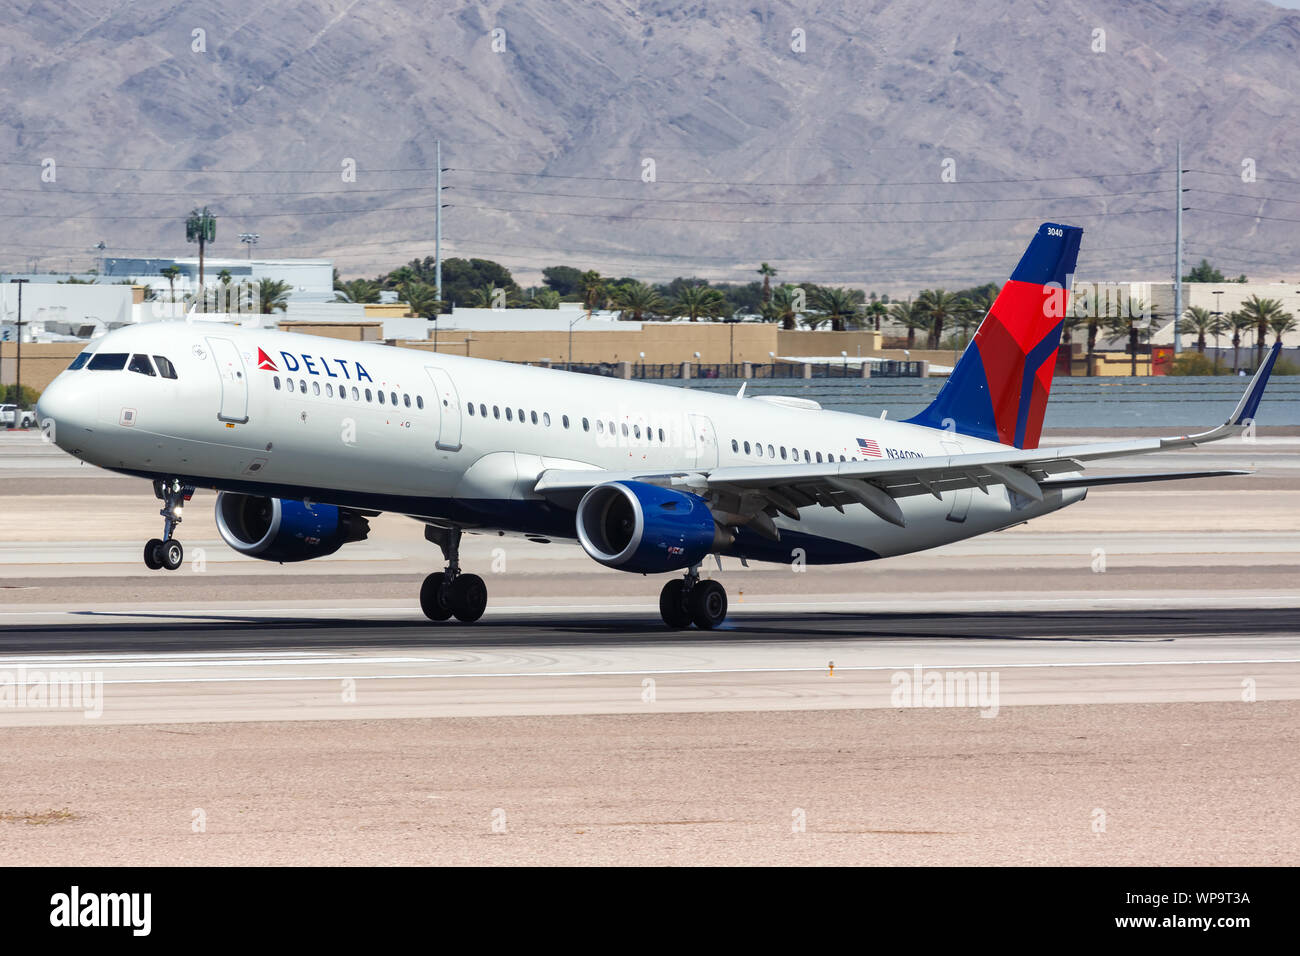 Las Vegas, Nevada – April 9, 2019: Delta Air Lines Airbus A321 airplane at Las Vegas airport (LAS) in the United States. Stock Photo